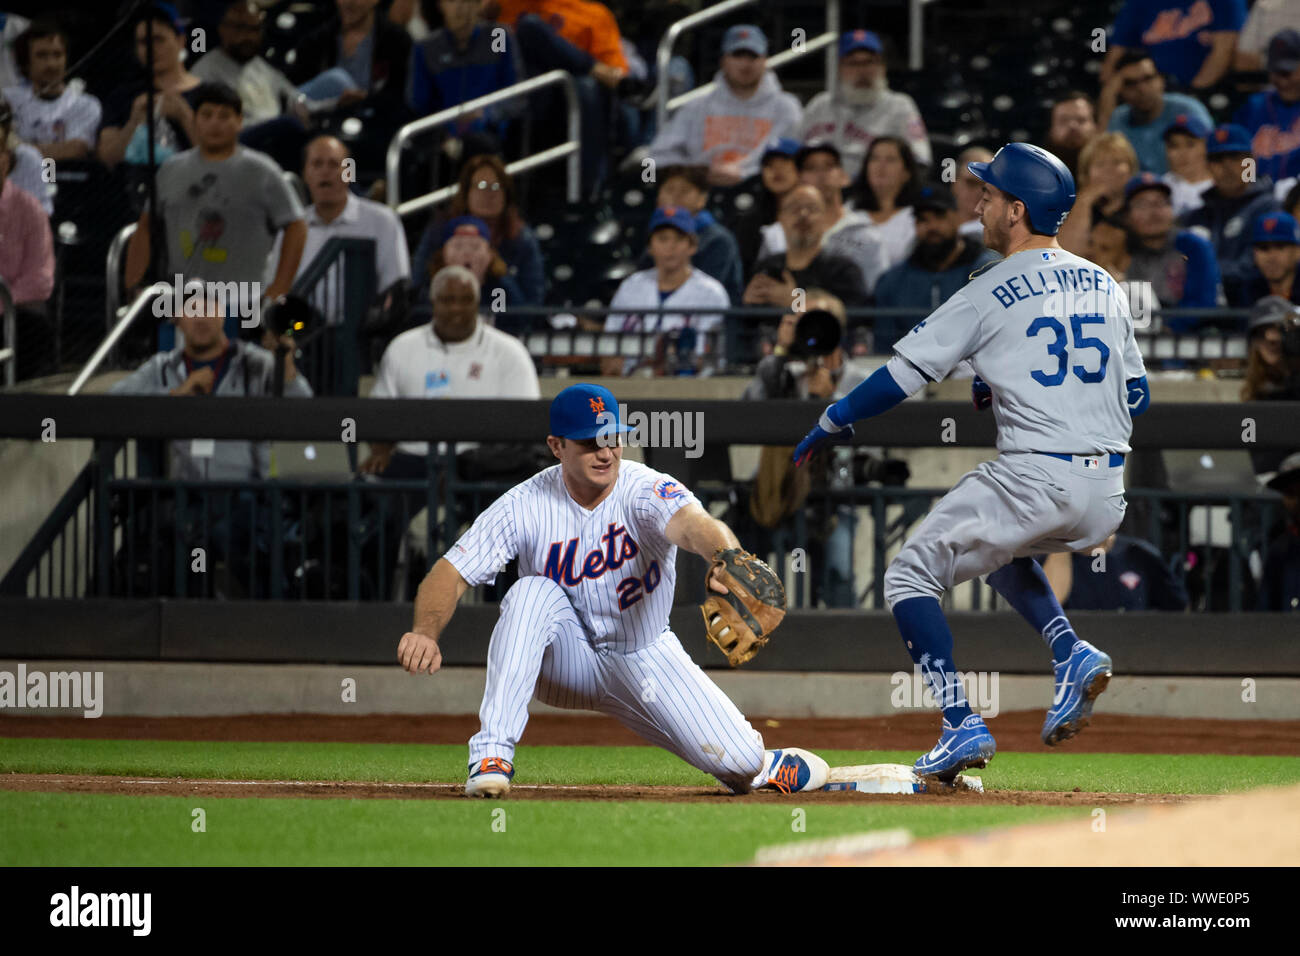 September 13, 2019: Los Angeles Dodgers right fielder Cody Bellinger (35) runs to beat out a ground ball at first base as New York Mets first baseman Pete Alonso (20) receives the ball during the game between The New York Mets and The Los Angeles Dodgers at Citi Field in Queens, New York. Mandatory credit: Kostas Lymperopoulos/CSM Stock Photo